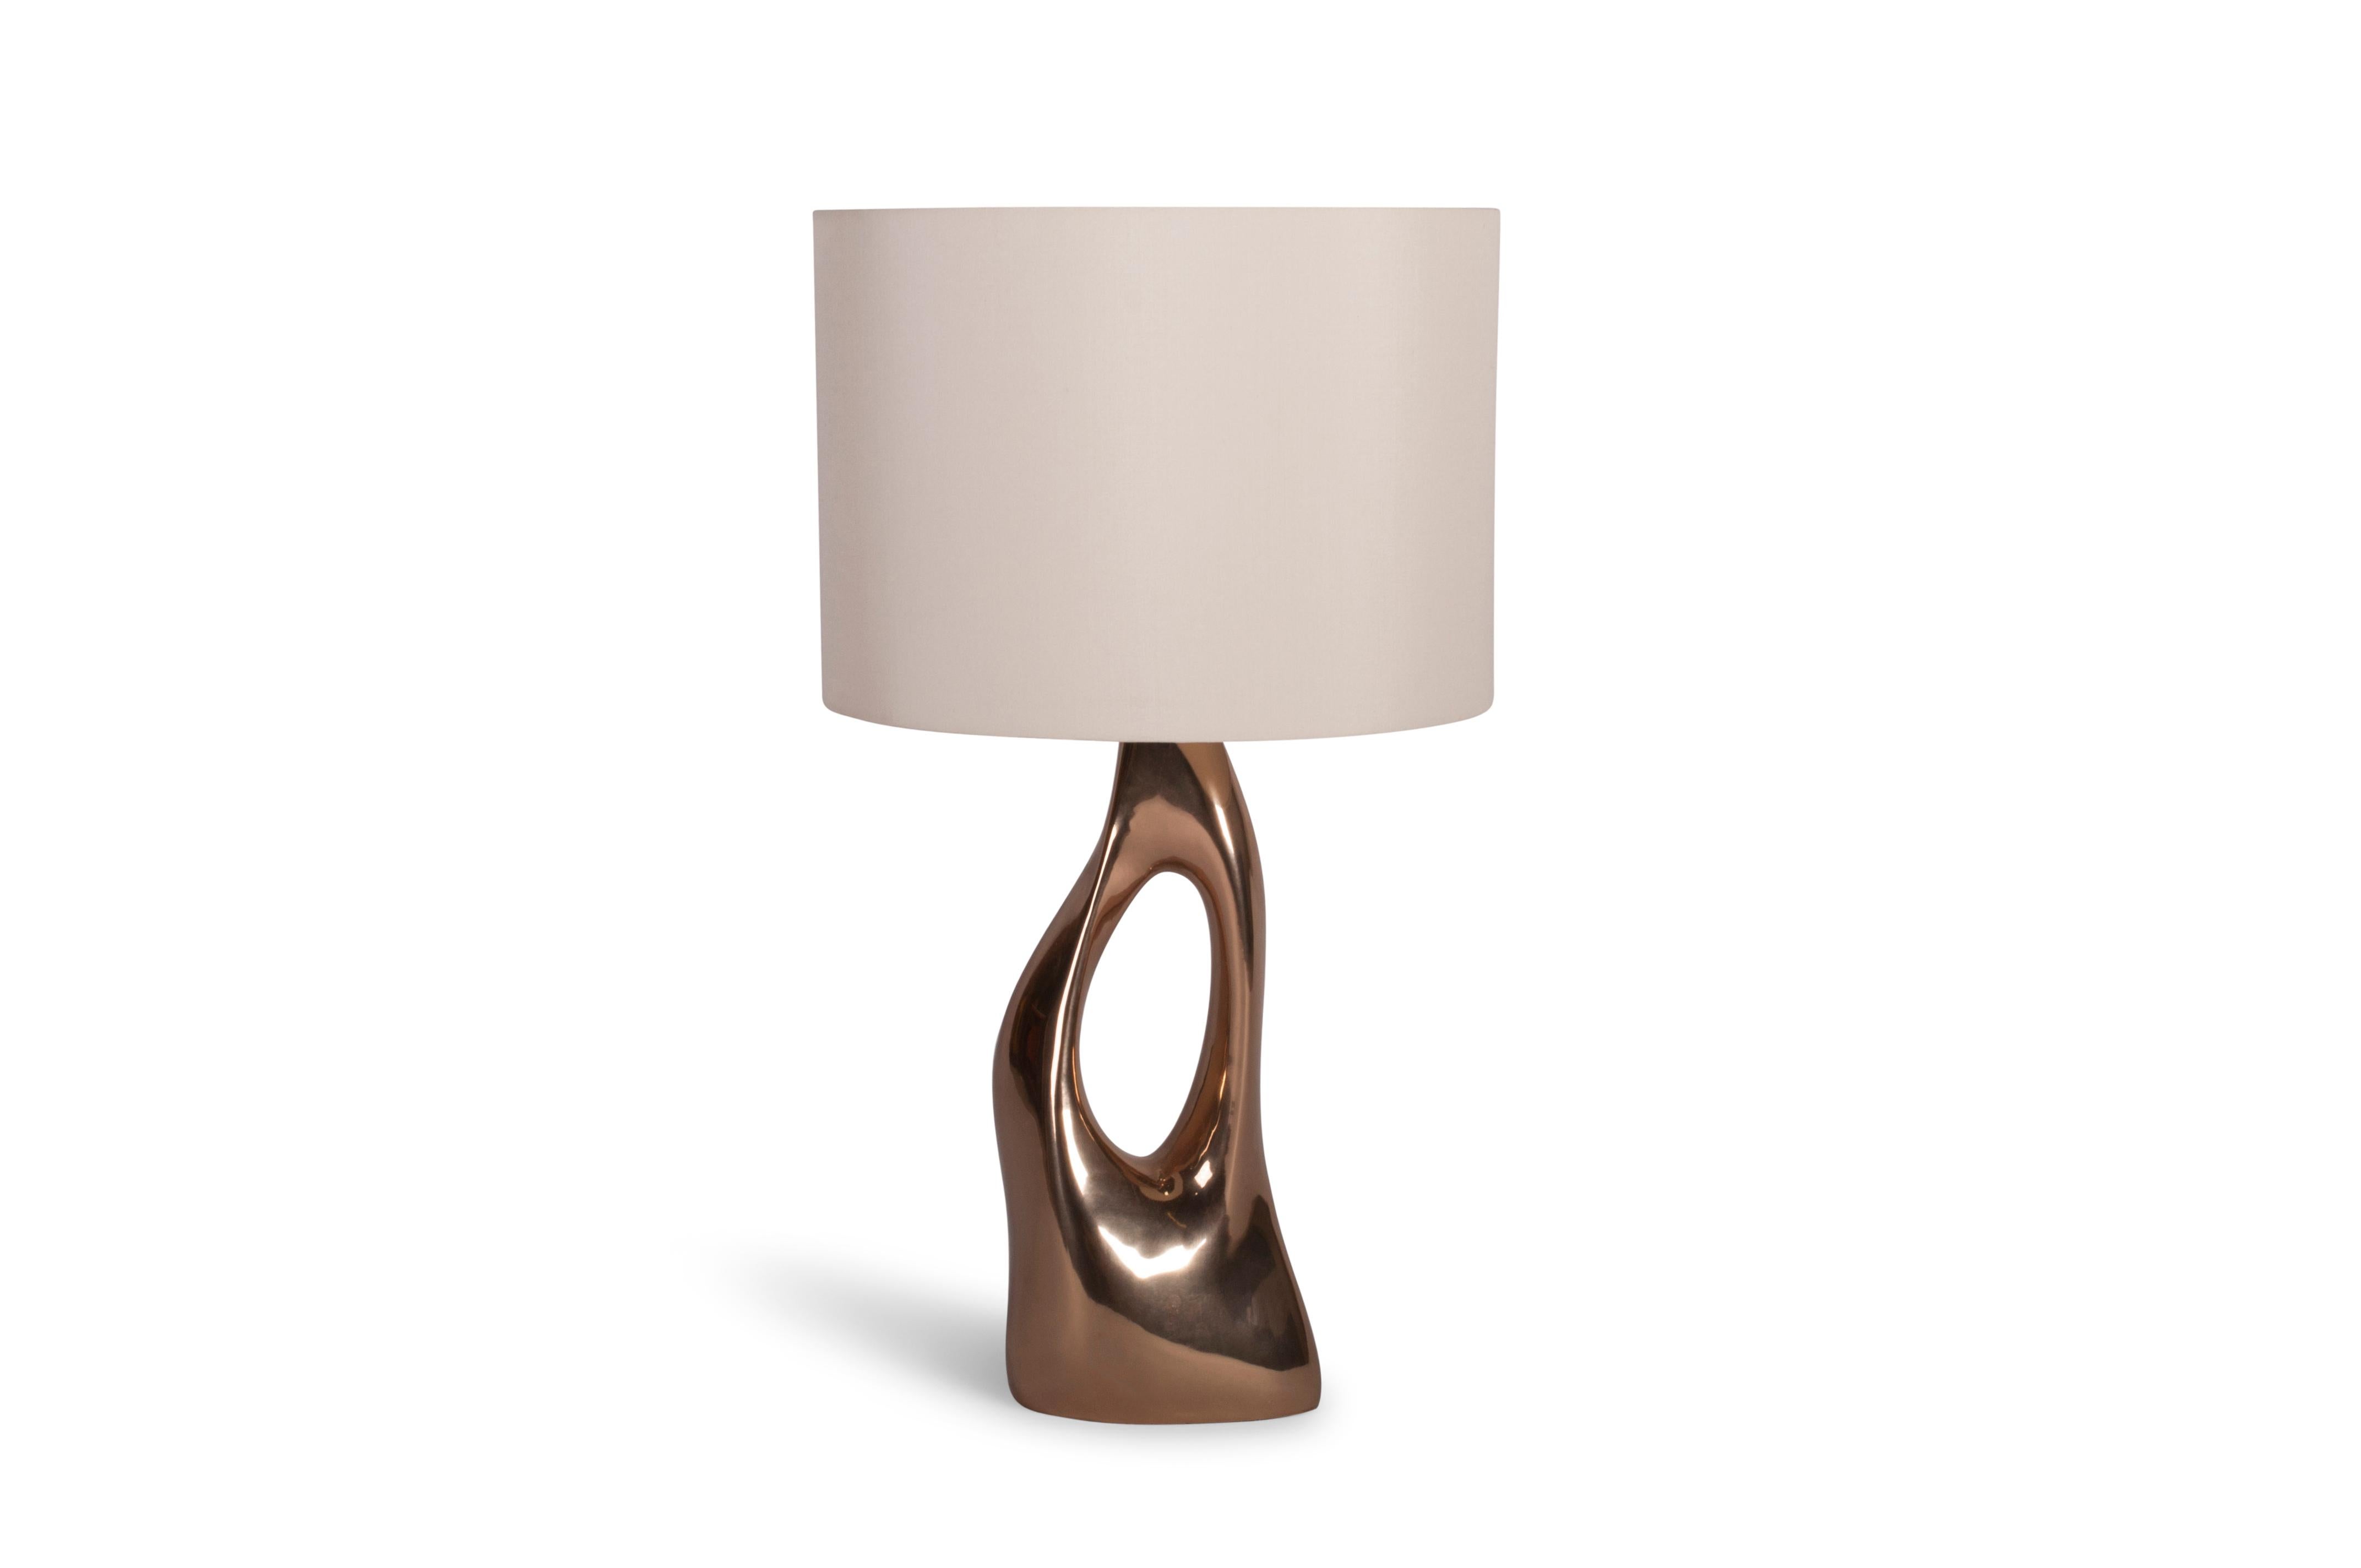 Sculptural table lamp made from ashwood with walnut stained
Dimension base: 16